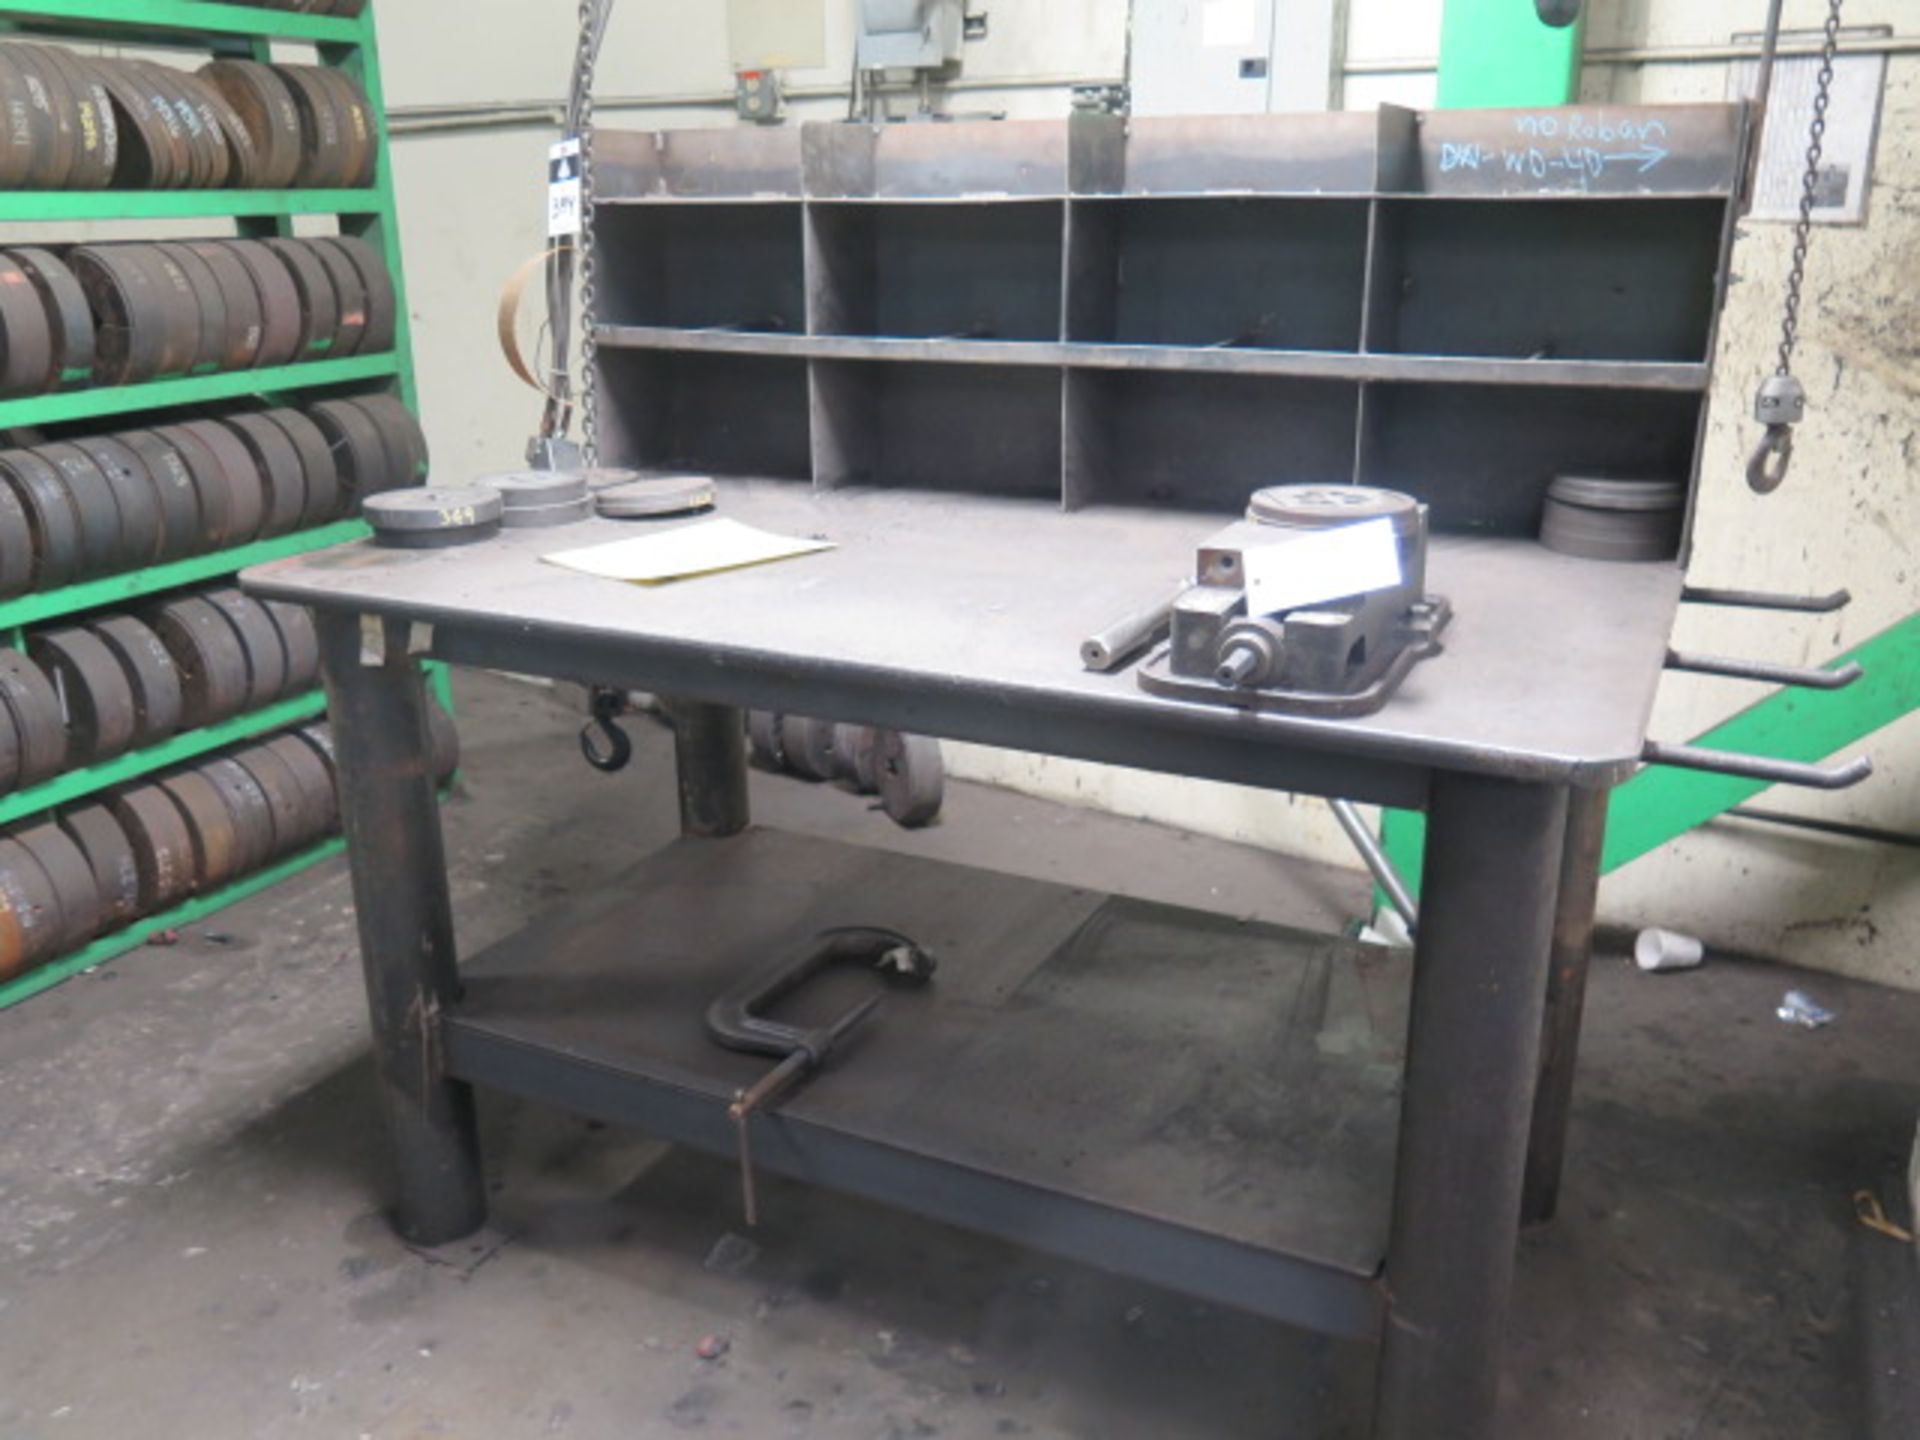 6" Angle-Lock Vise w/ 36" x 60" x 1" Heavy Duty Steel Table (SOLD AS-IS - NO WARRANTY) - Image 3 of 6